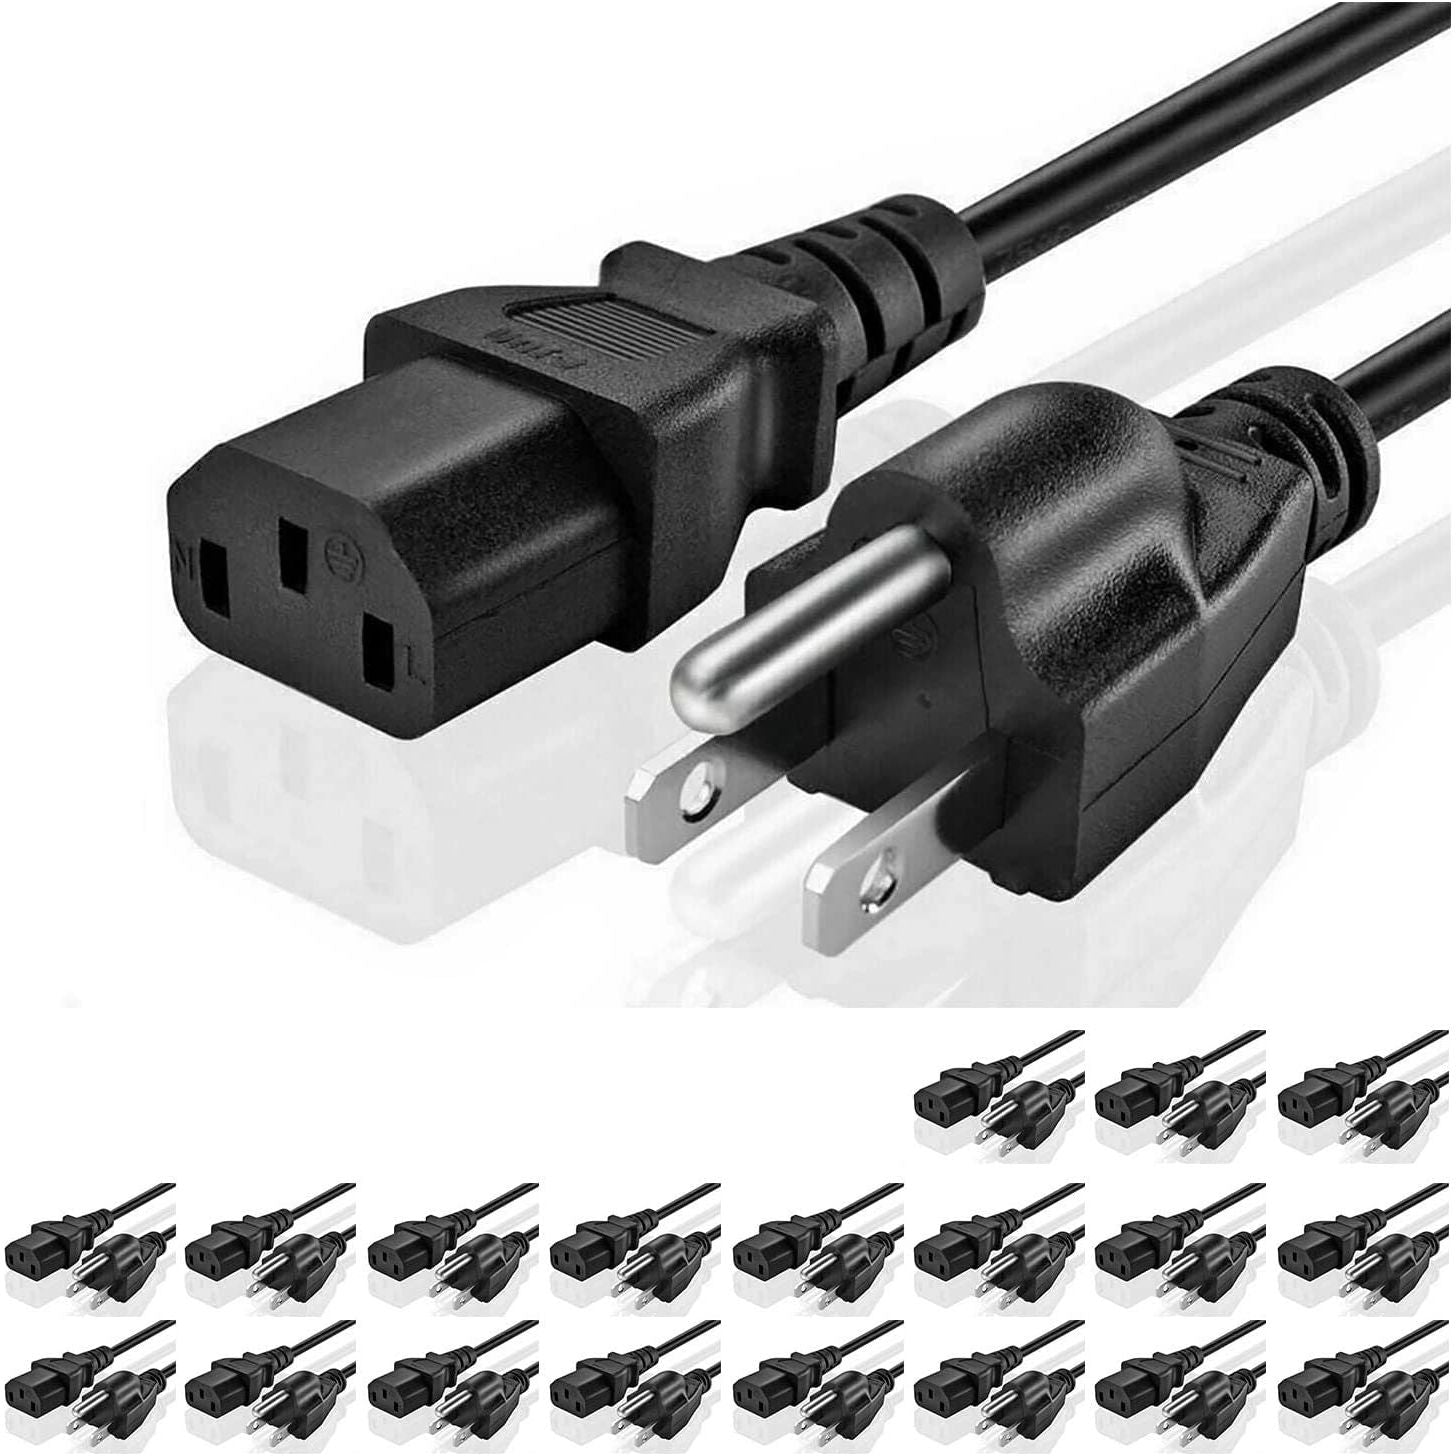 5 Core 6 Feet 5 Pieces 3 Prong Replacement AC Wall Power Cord for LCD Computer Monitor Premium Quality Copper Wire PC 1001